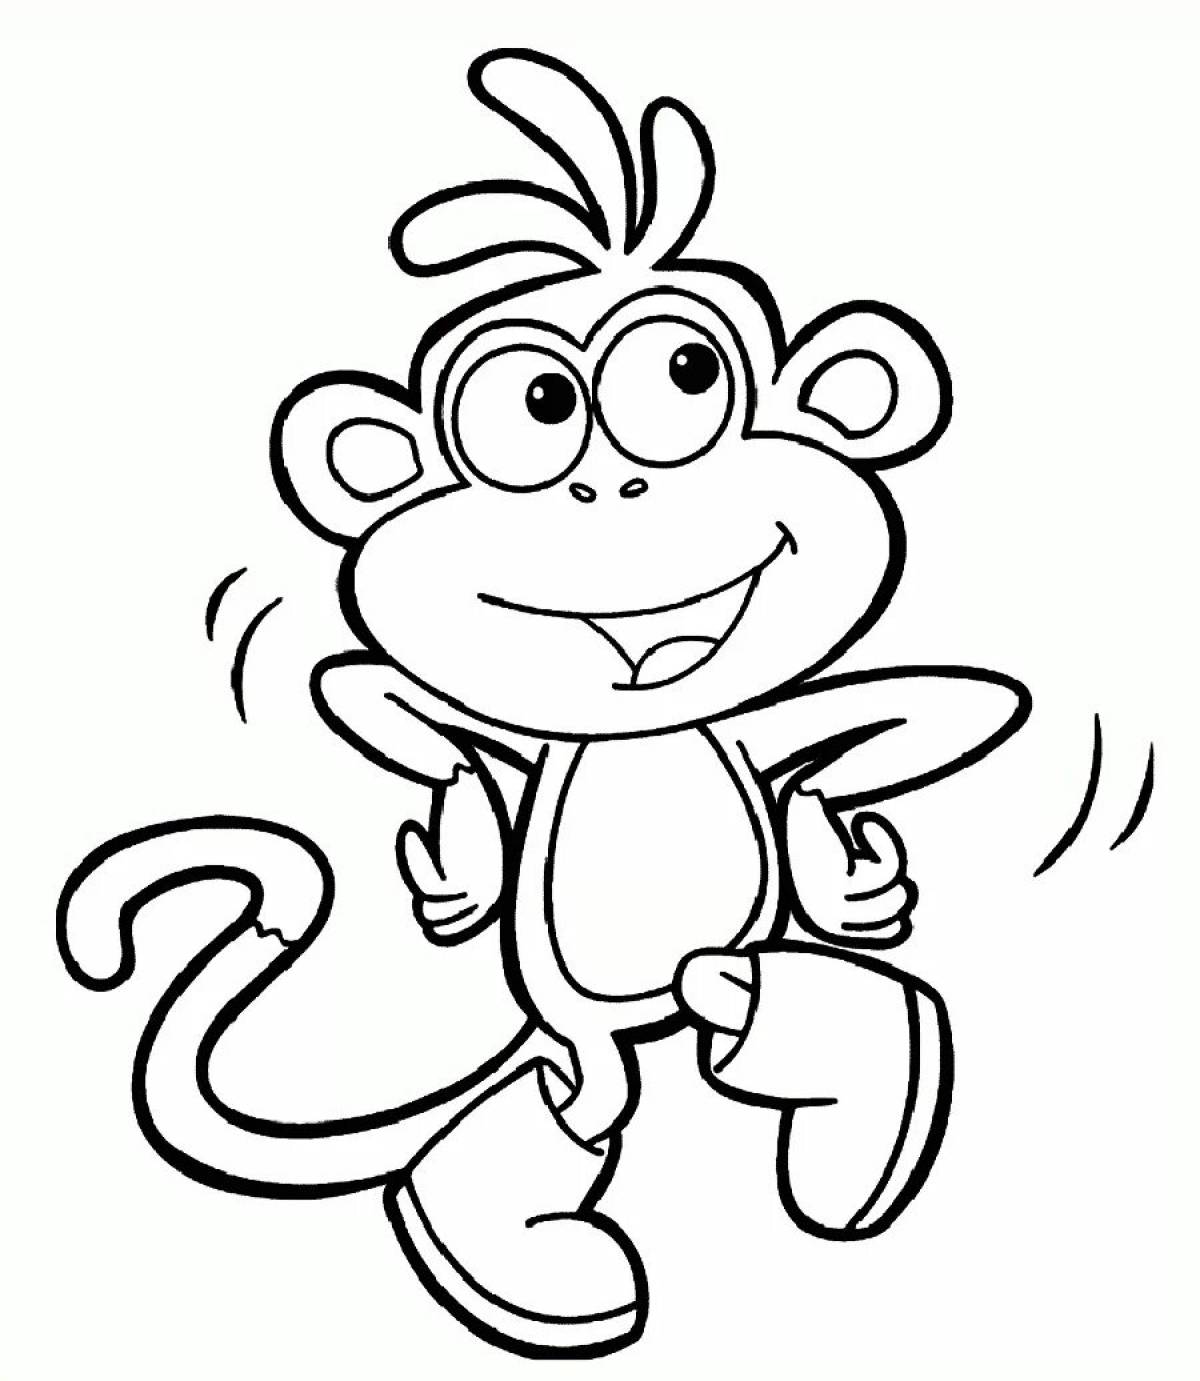 Awesome monkey coloring book